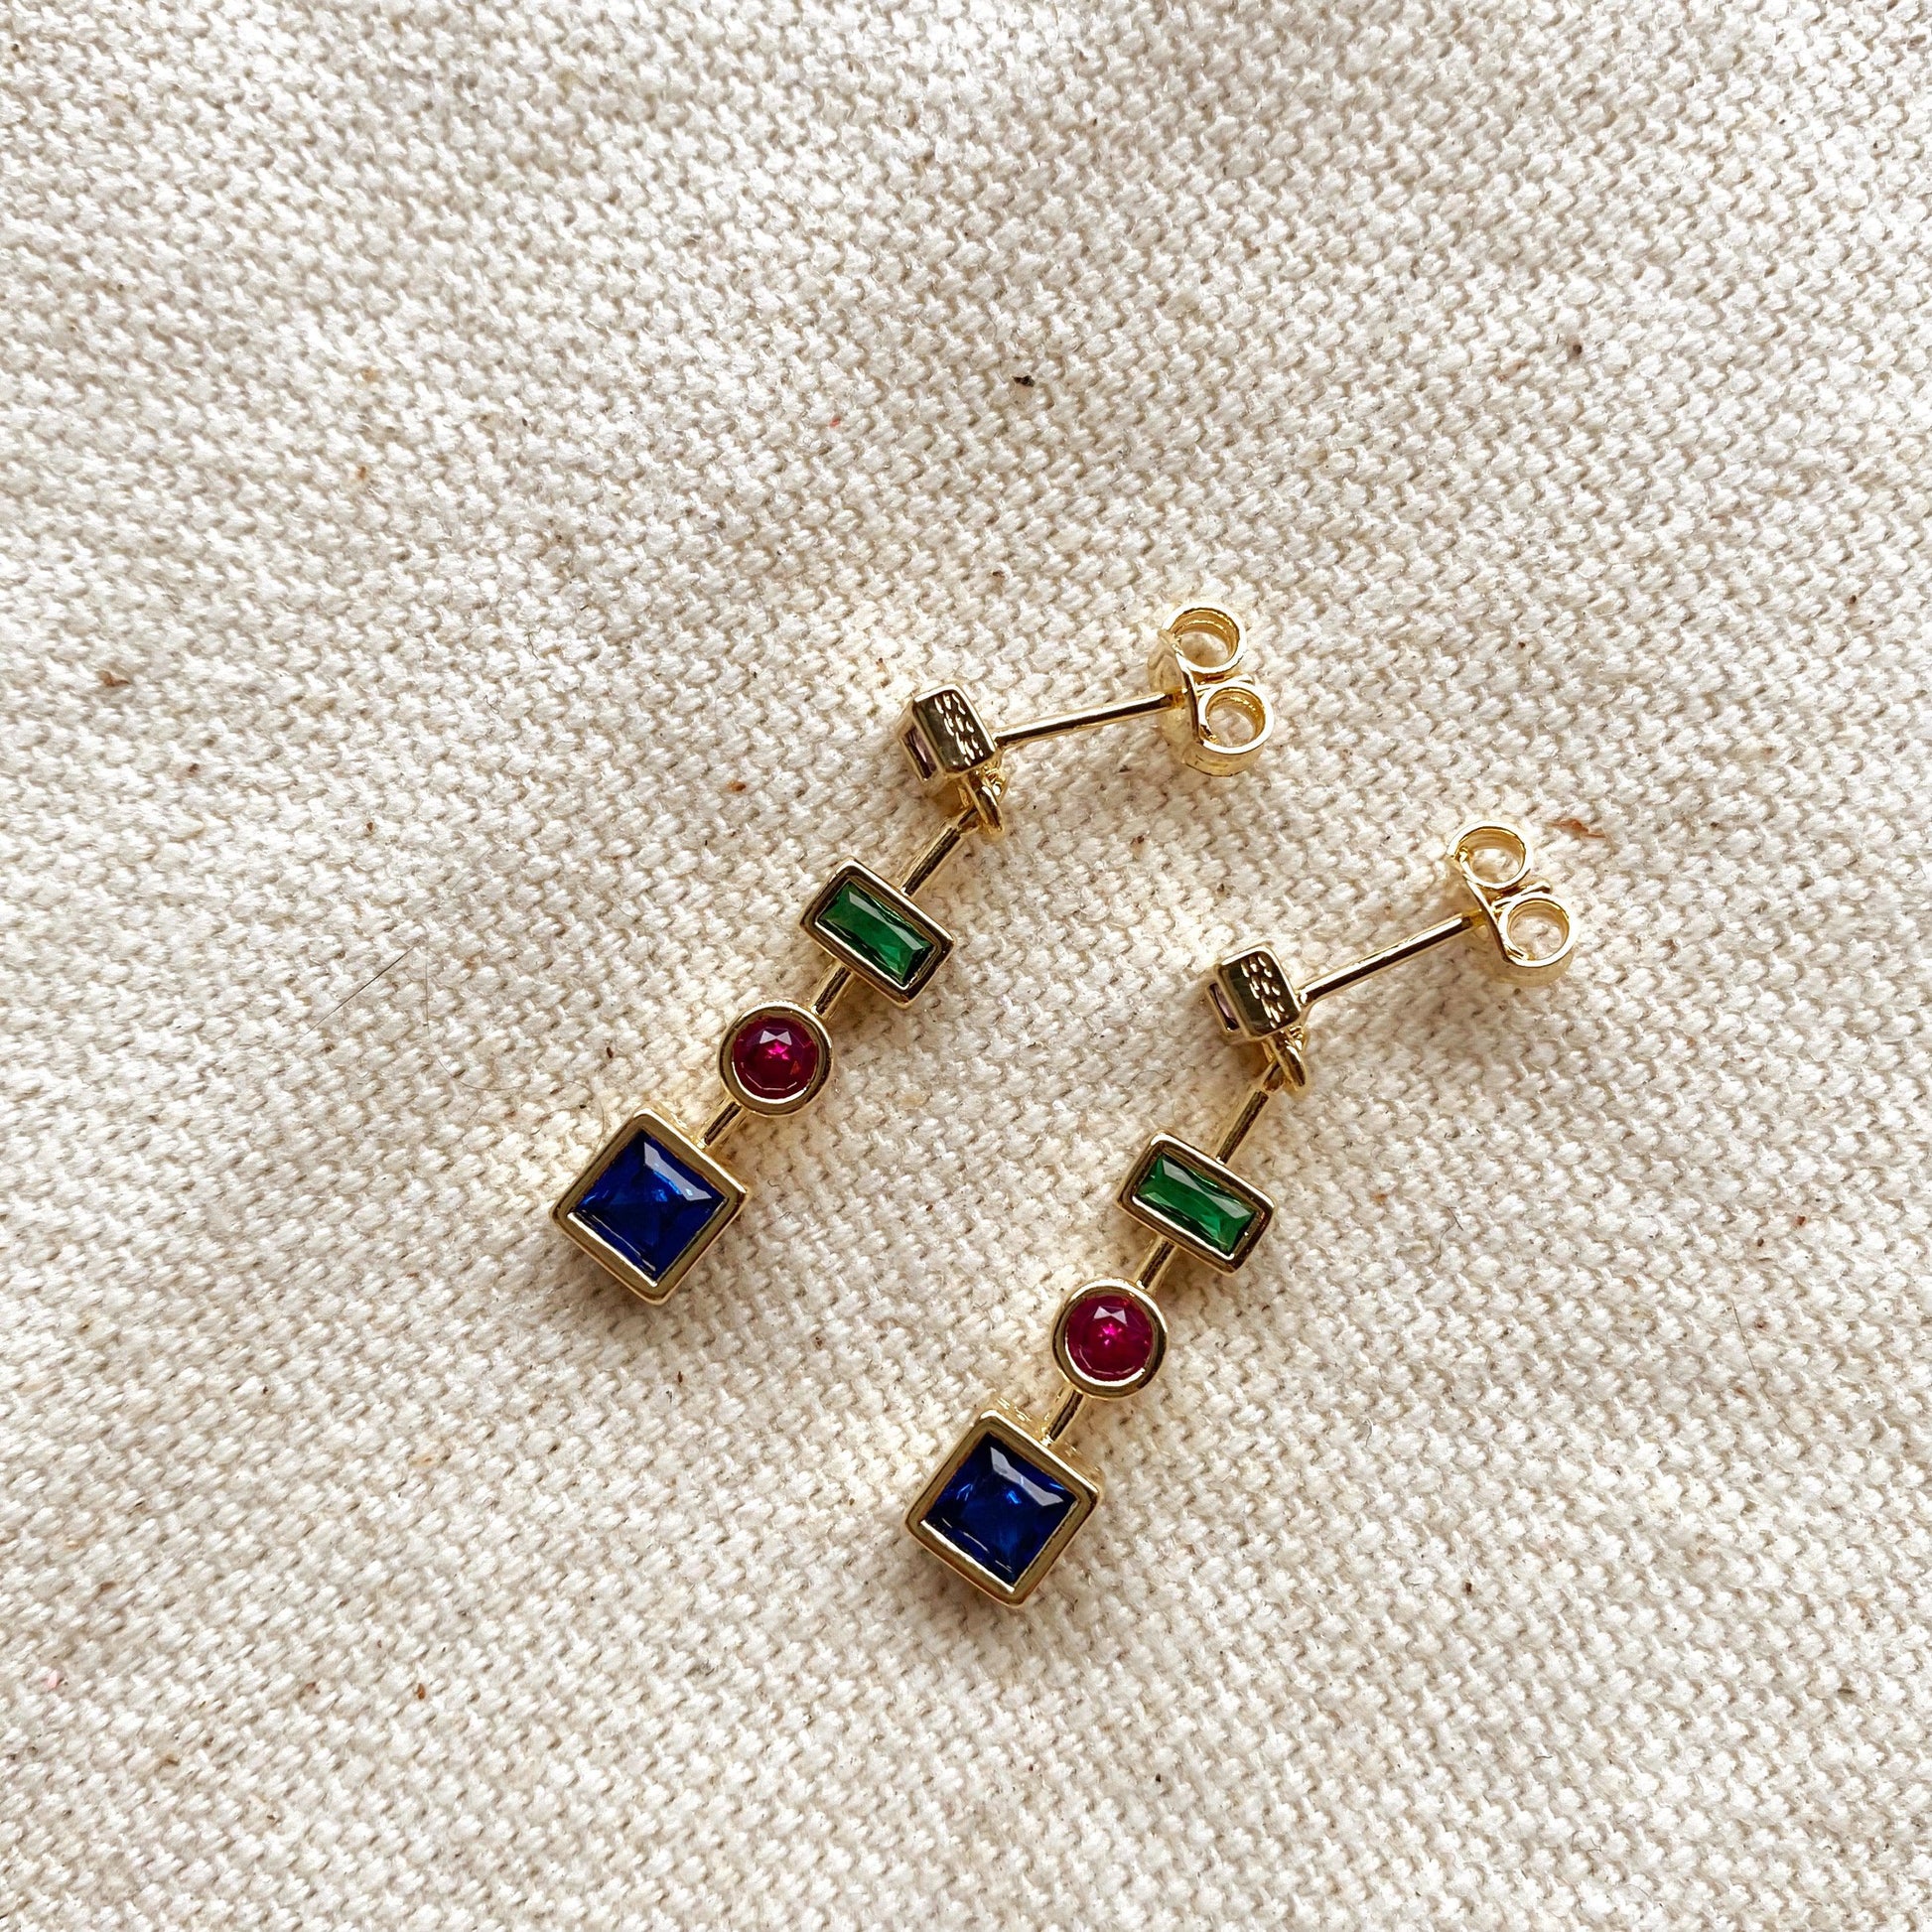 GoldFi 18k Gold Filled Colorful Dangling Shapes Earring